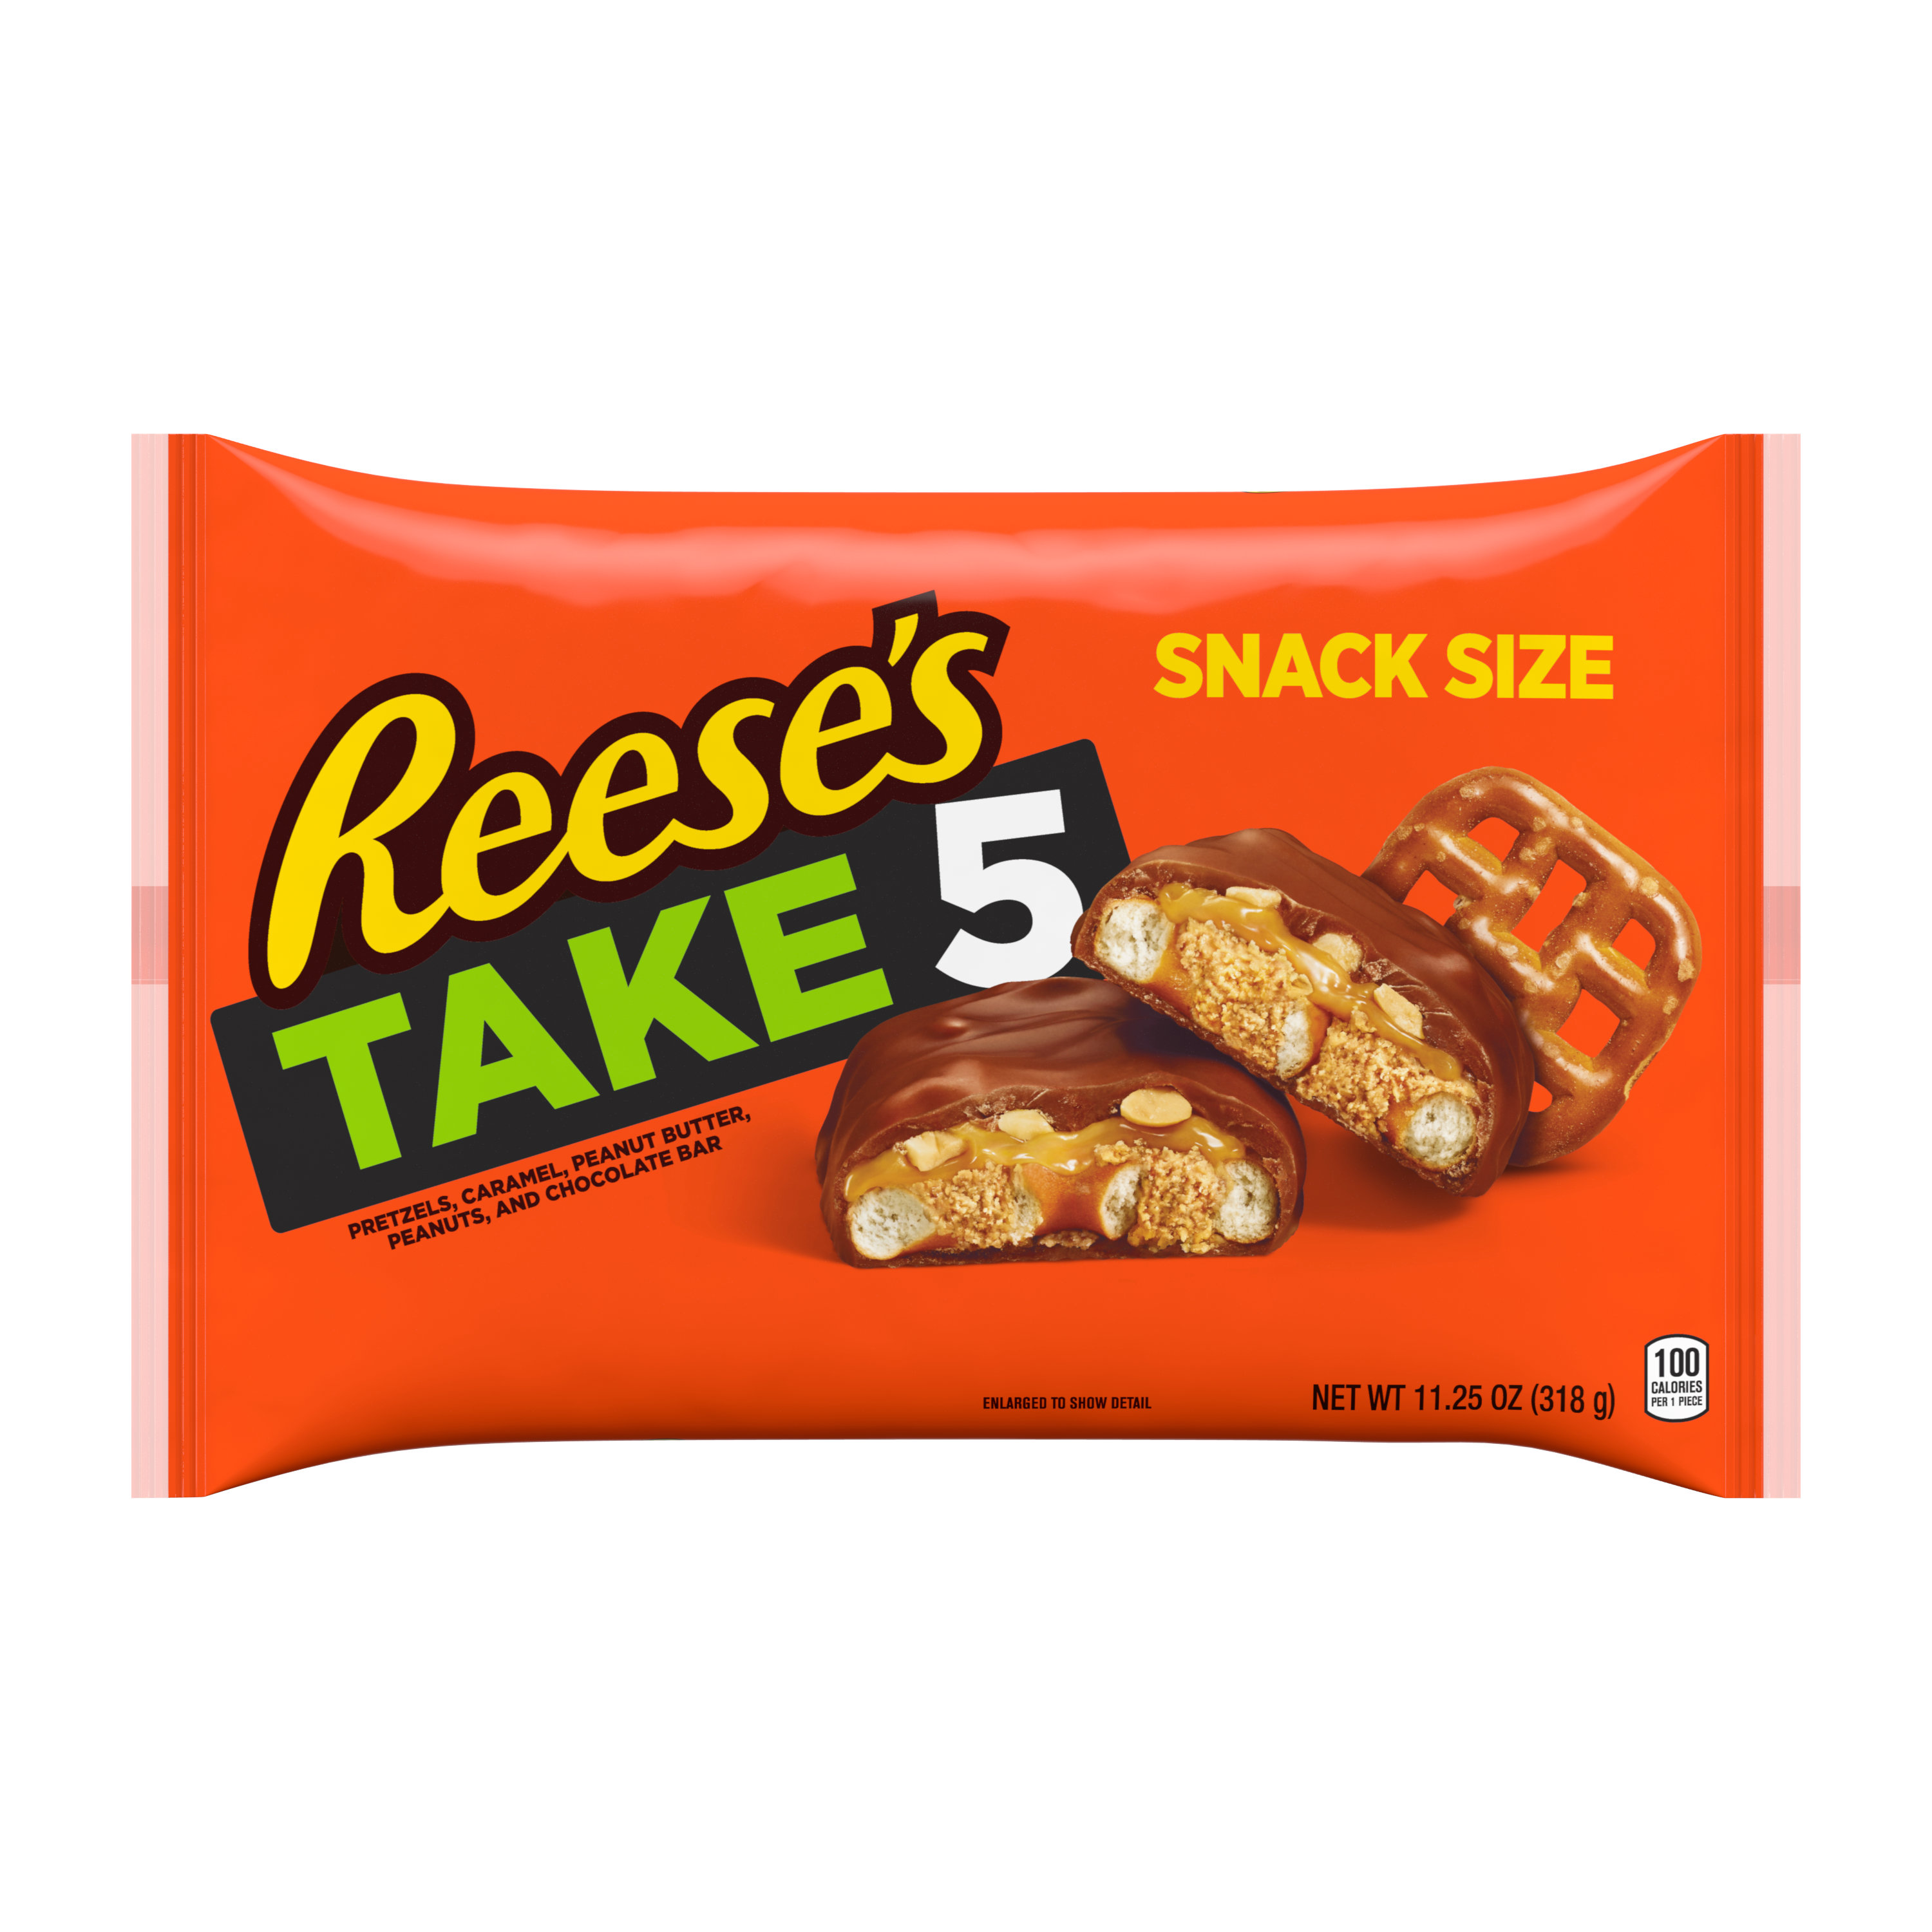 REESE'S TAKE5 Chocolate Peanut Butter Snack Size Candy Bars, 11.25 oz bag - Front of Package